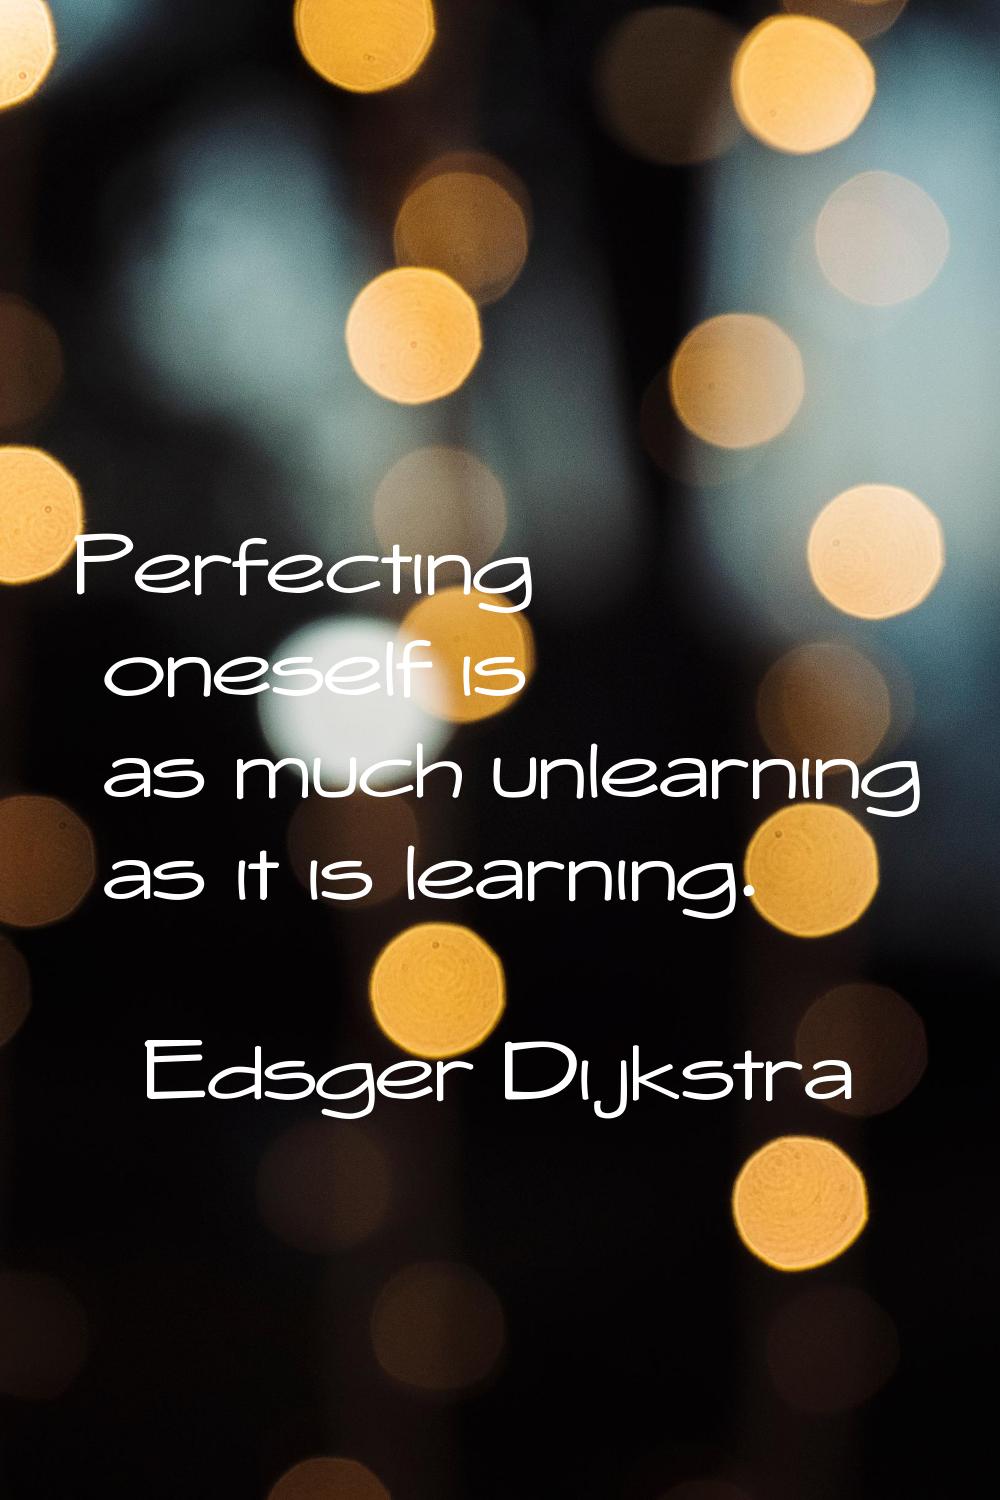 Perfecting oneself is as much unlearning as it is learning.